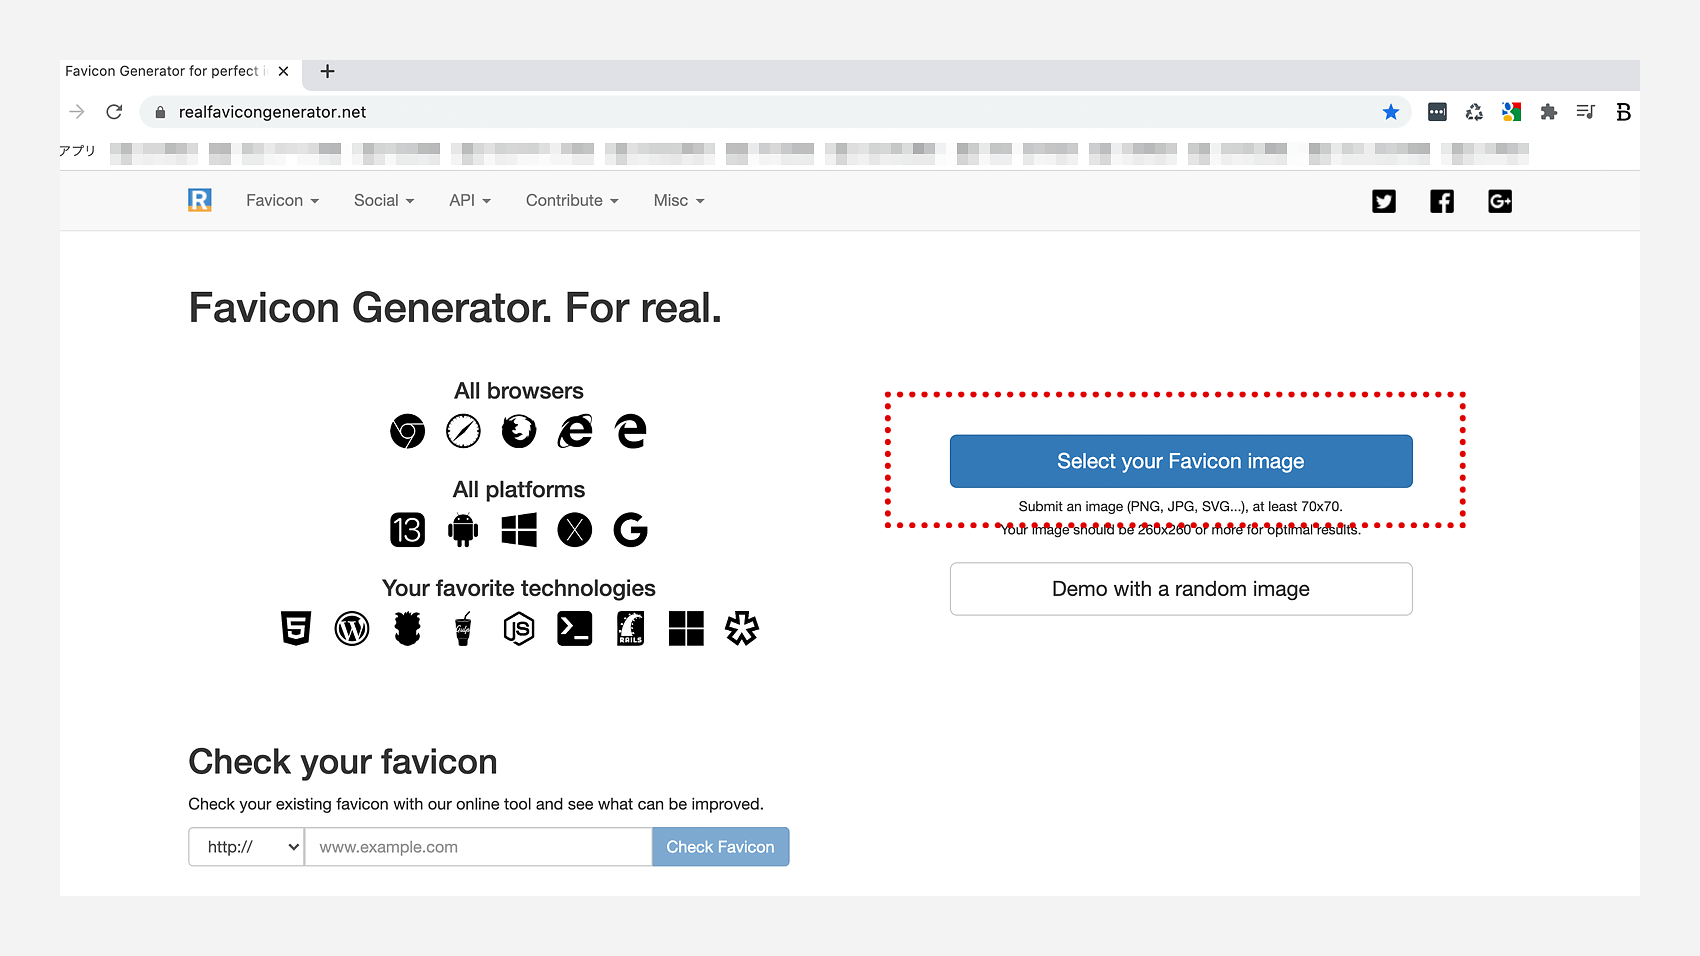 Your generated favicon